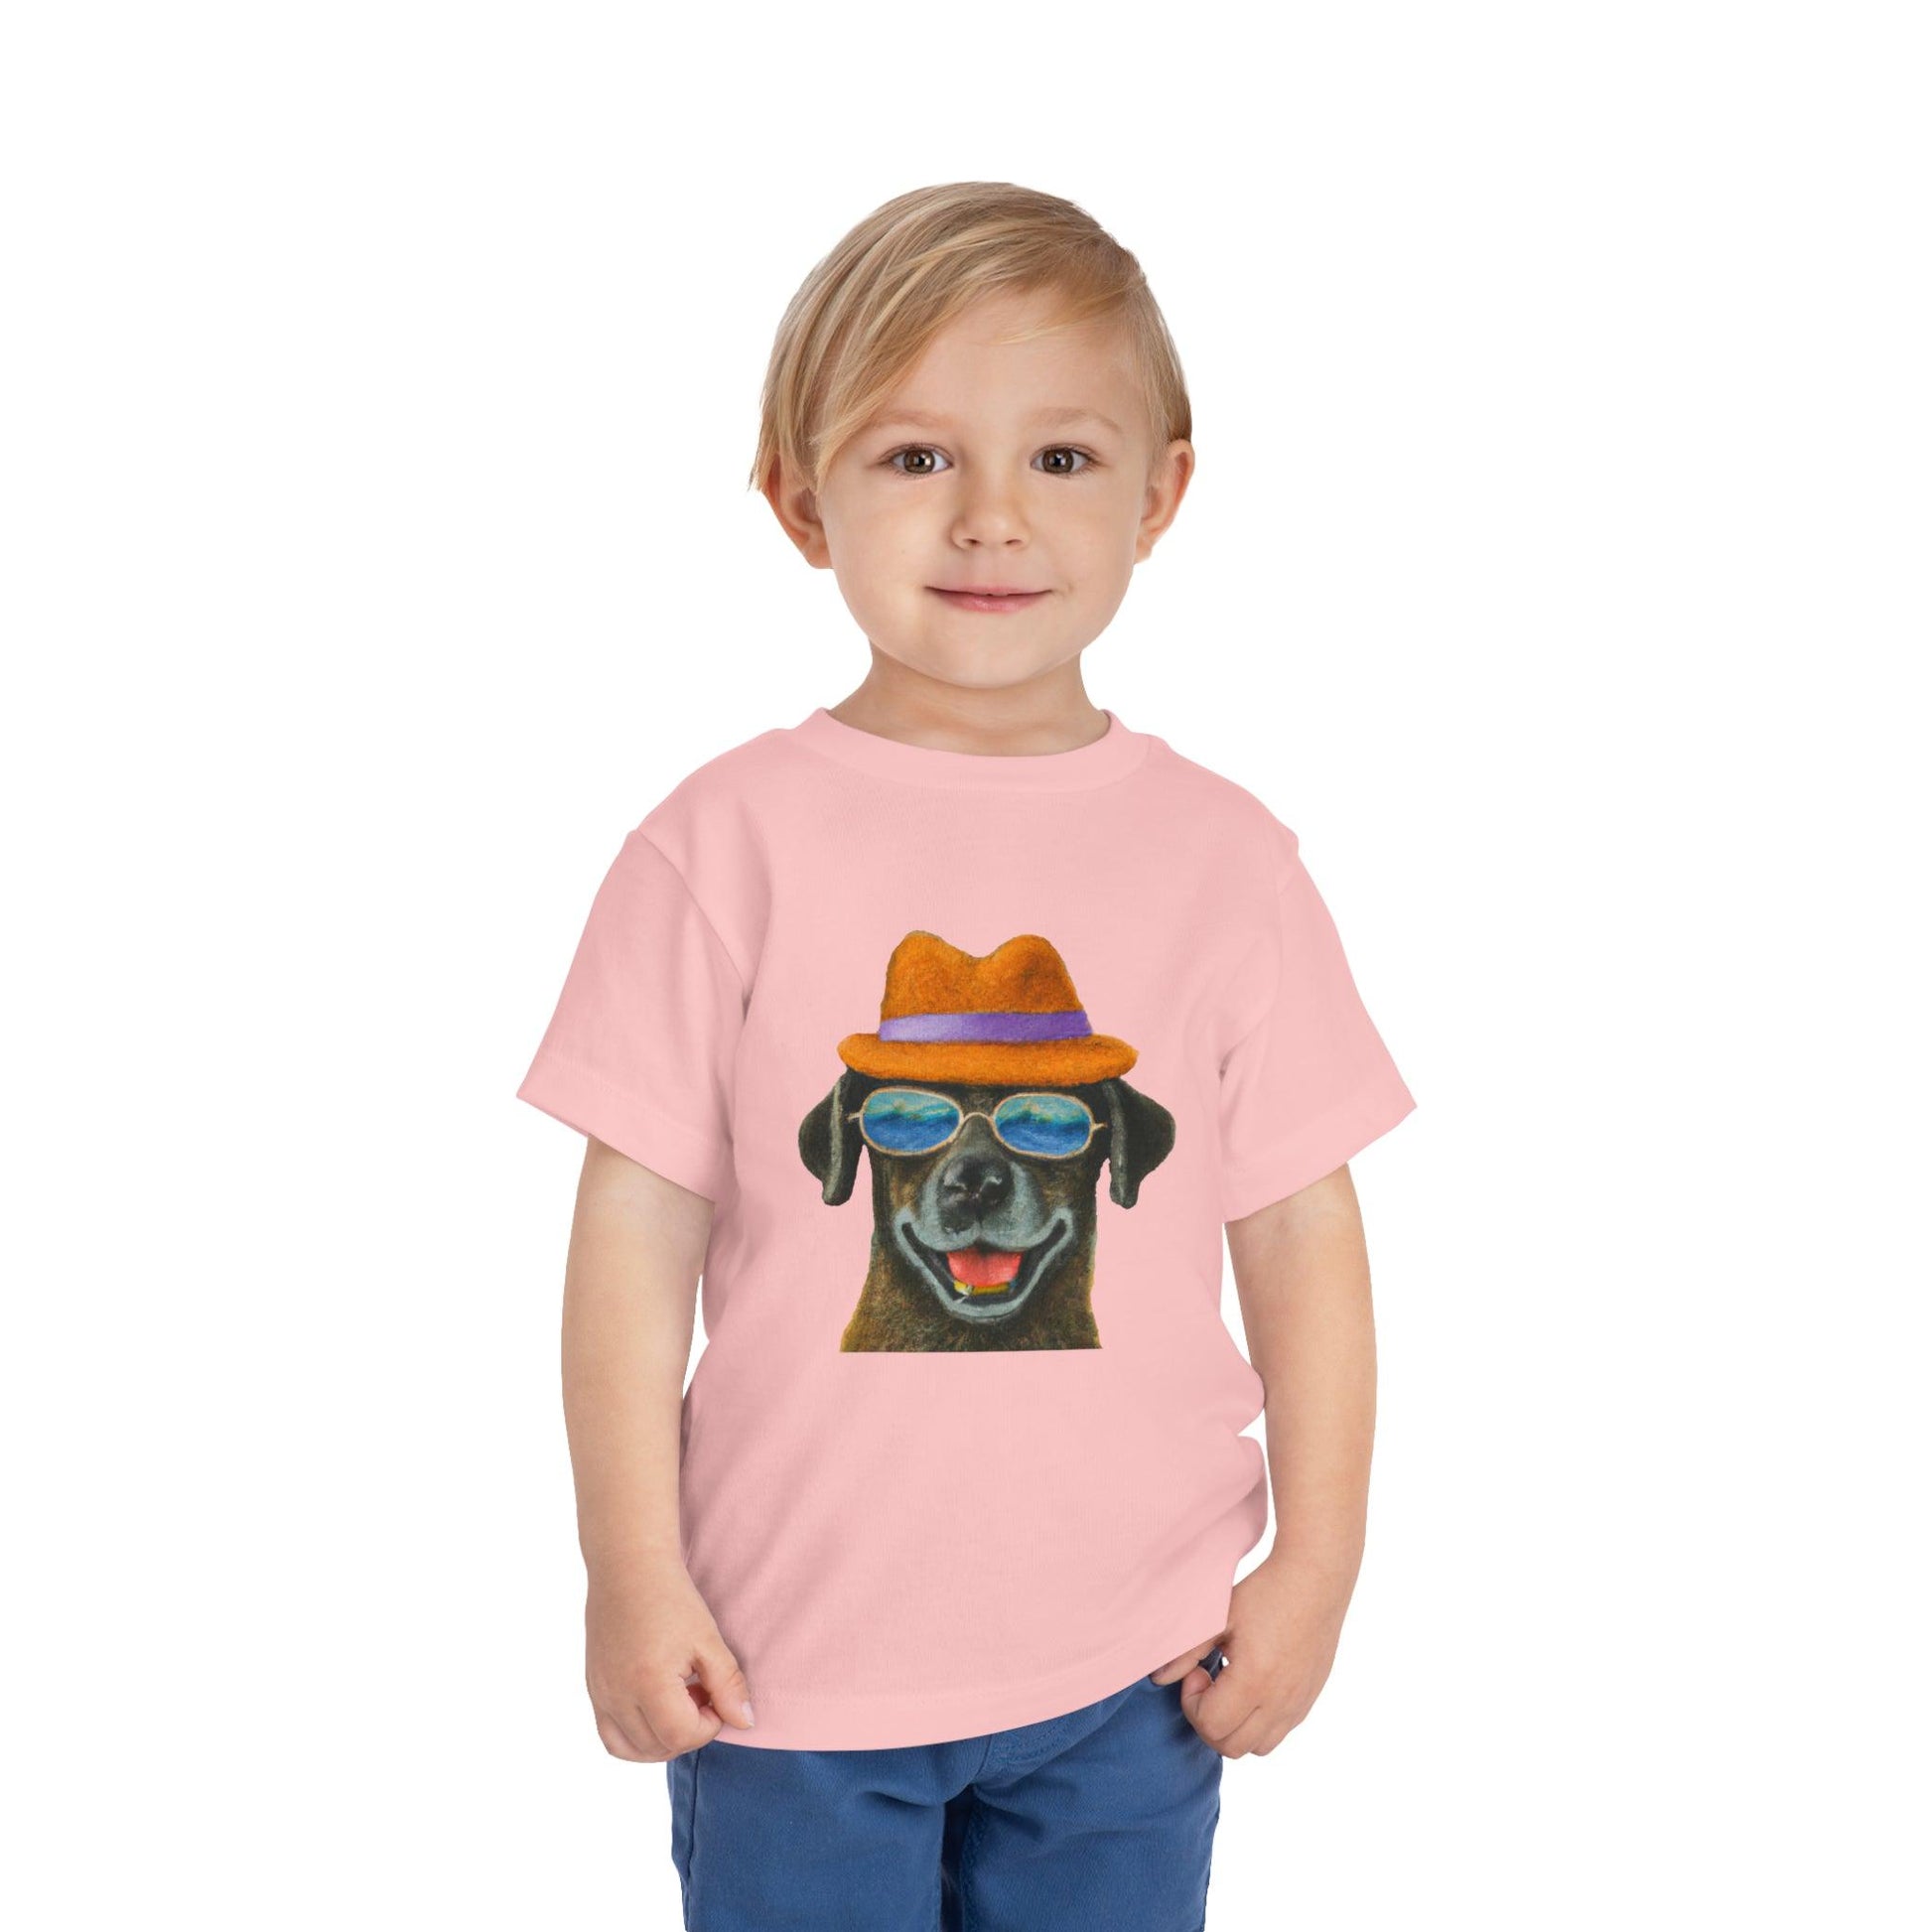 Dog at the beach wearing a hat and sunglasses painted art Toddler Short Sleeve Tee - Giftsmojo